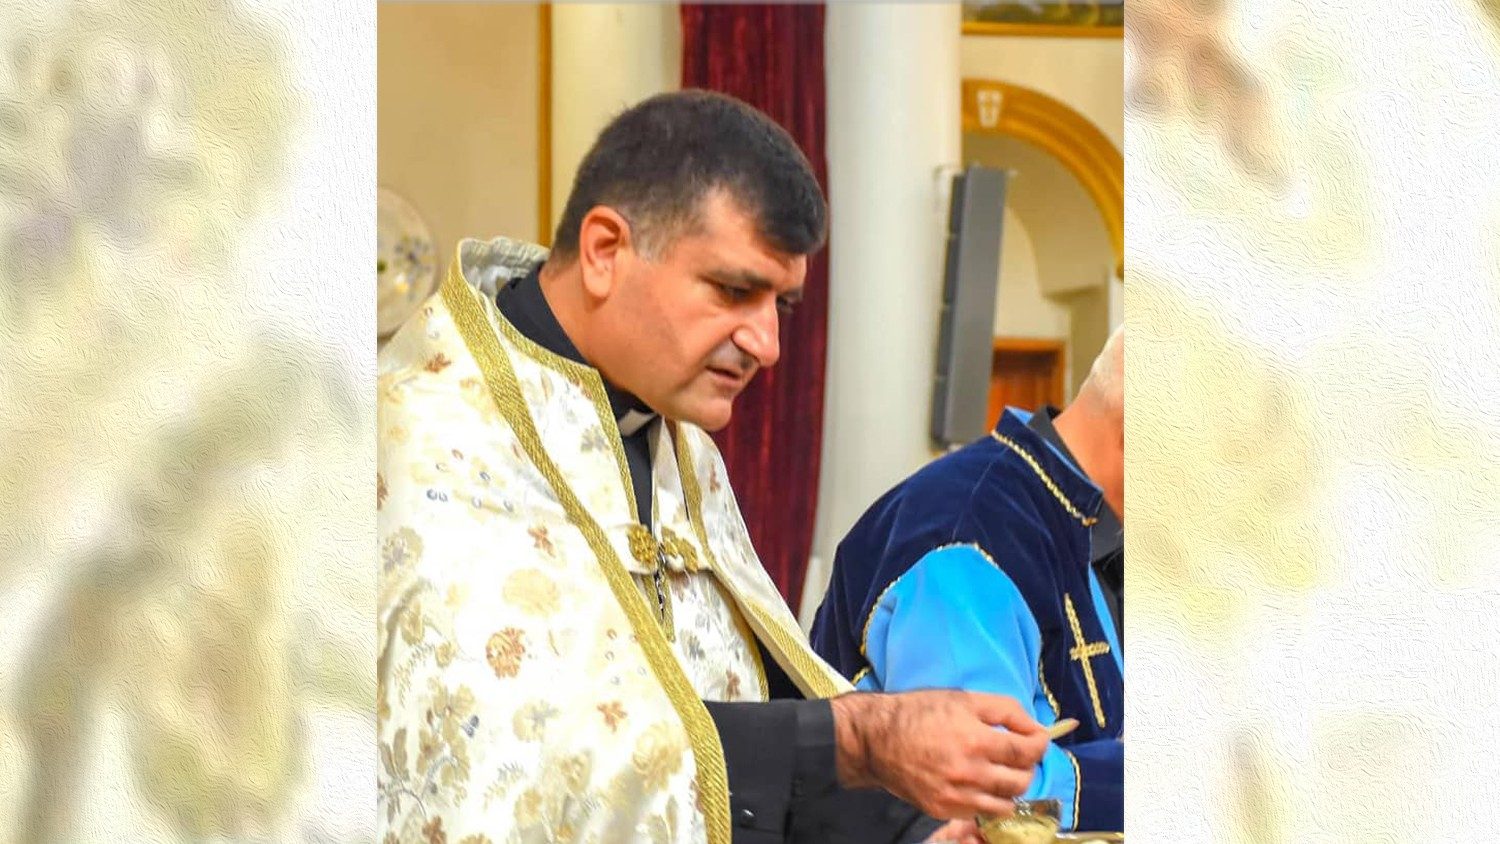 Armenian Catholic priest and his father shot dead in Syria - Vatican News